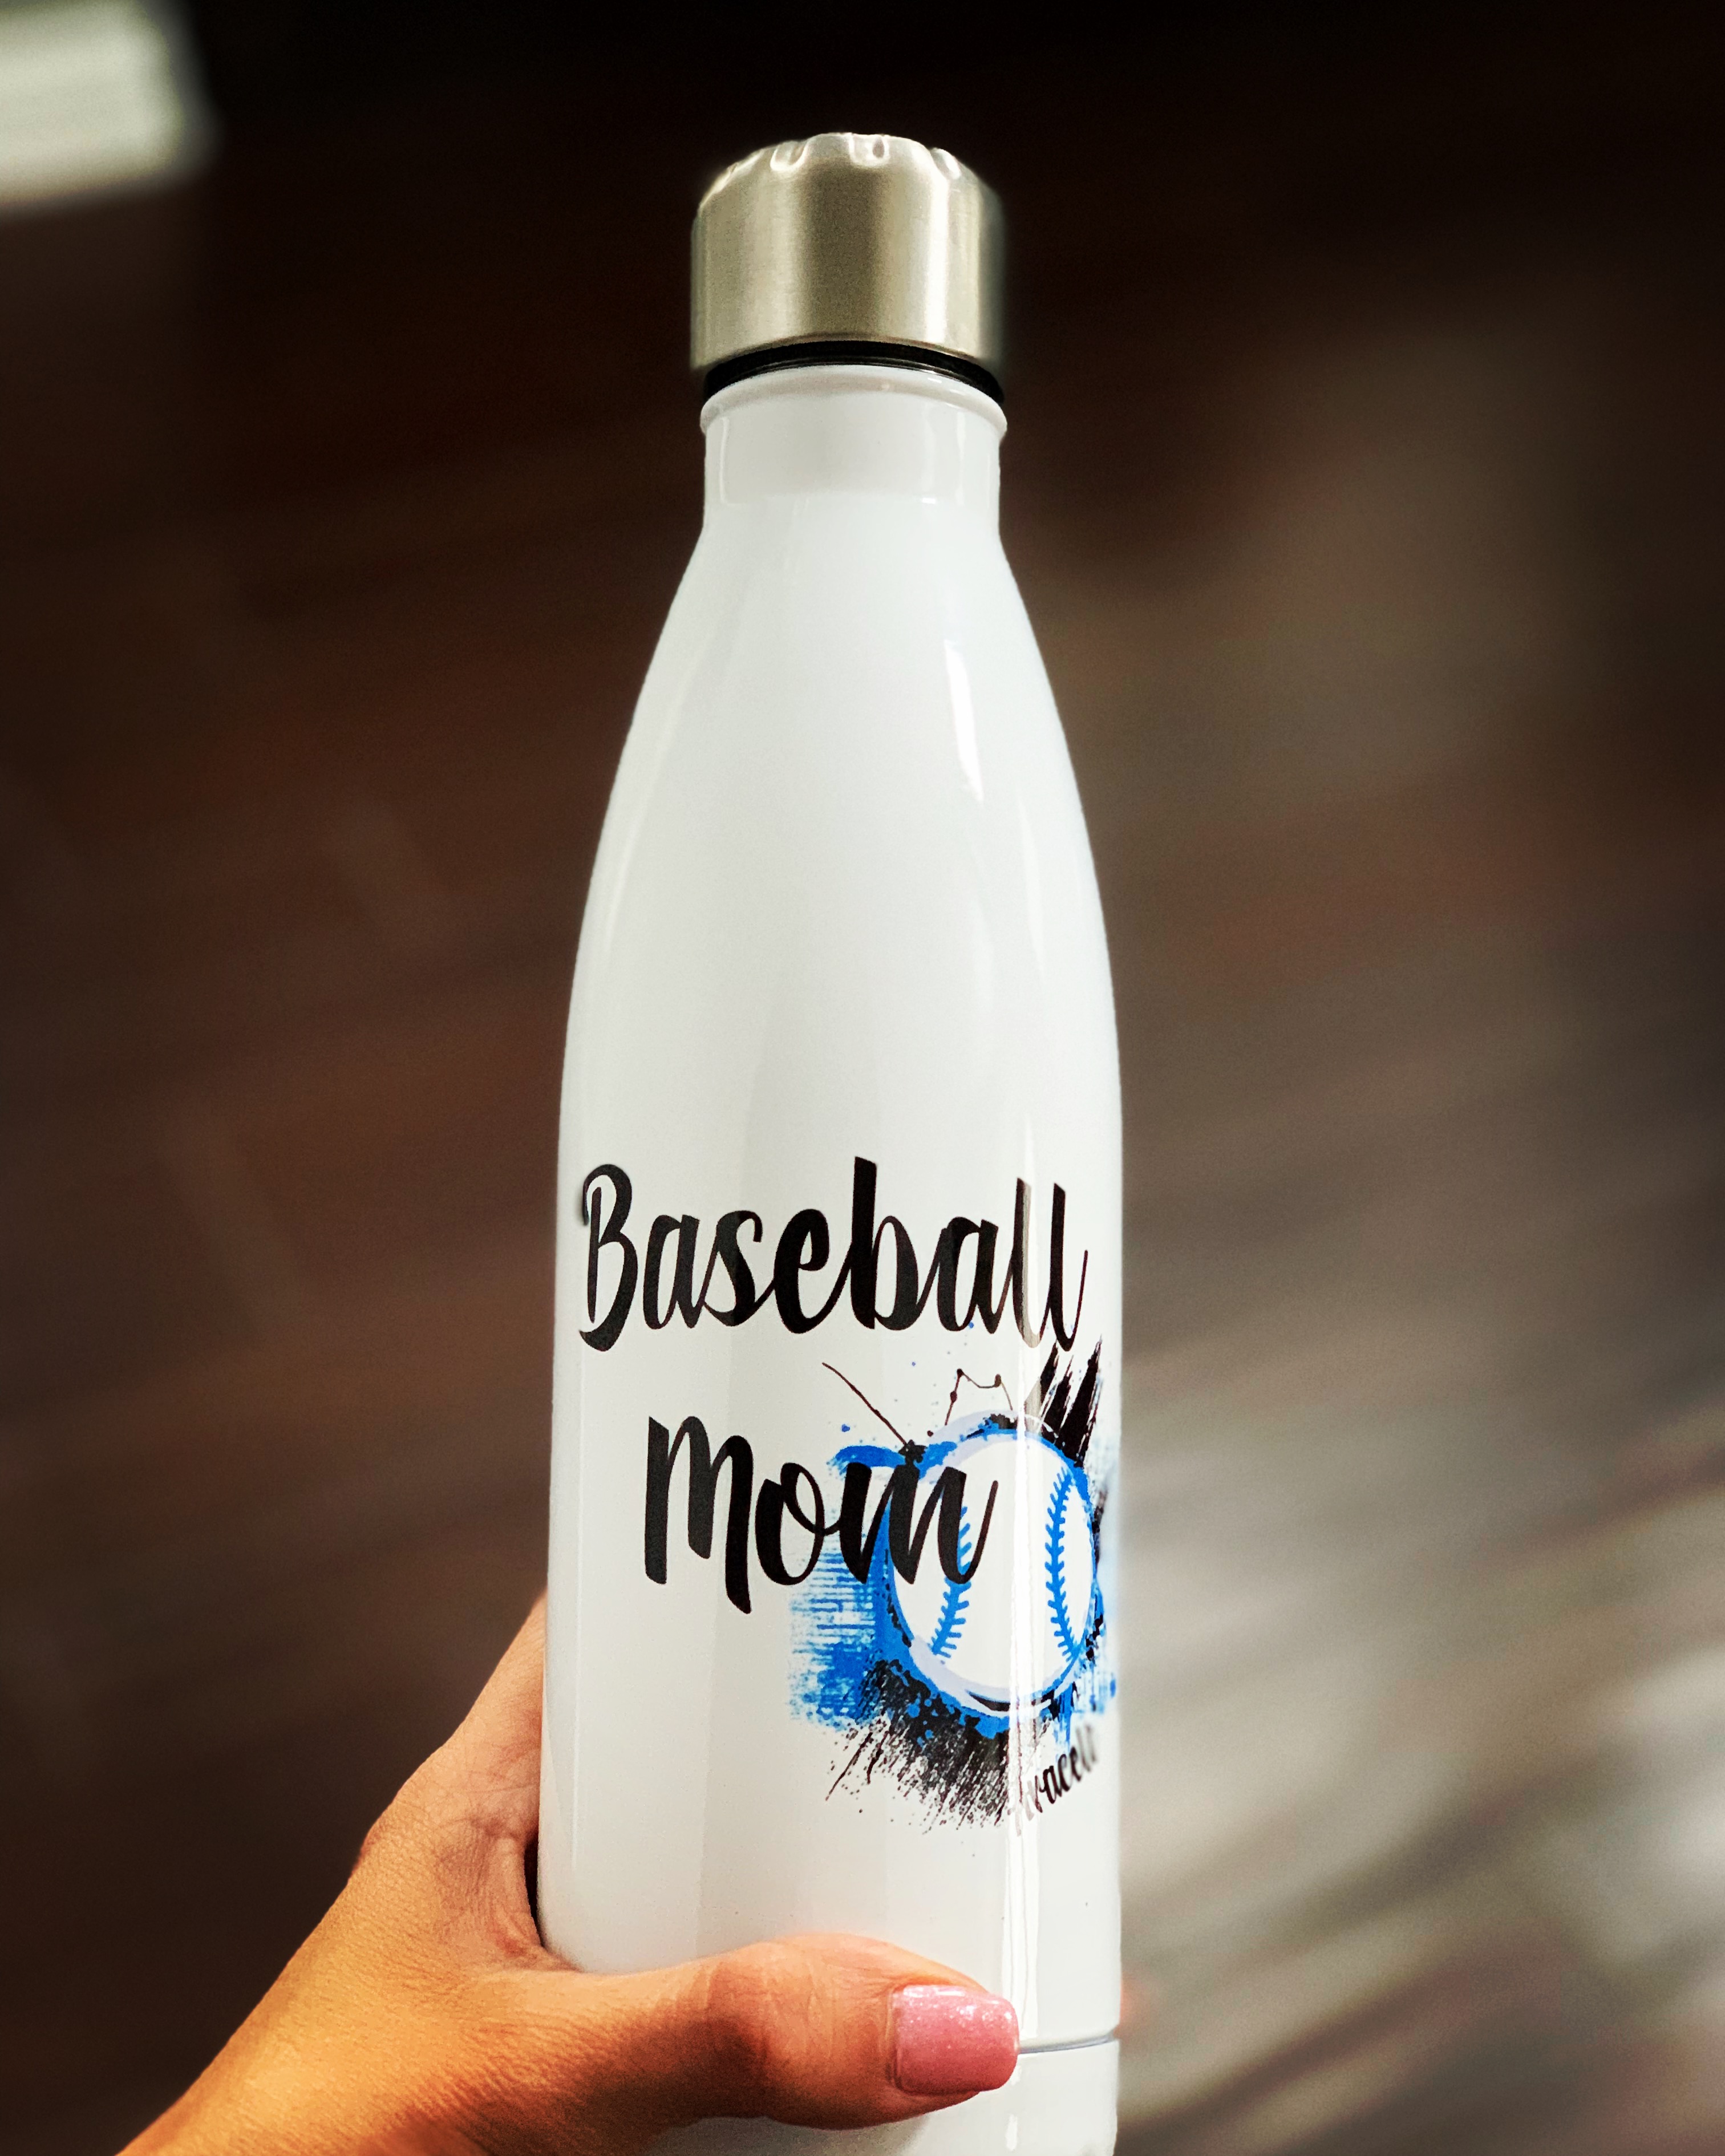 Baseball mom water bottle made with sublimation printing